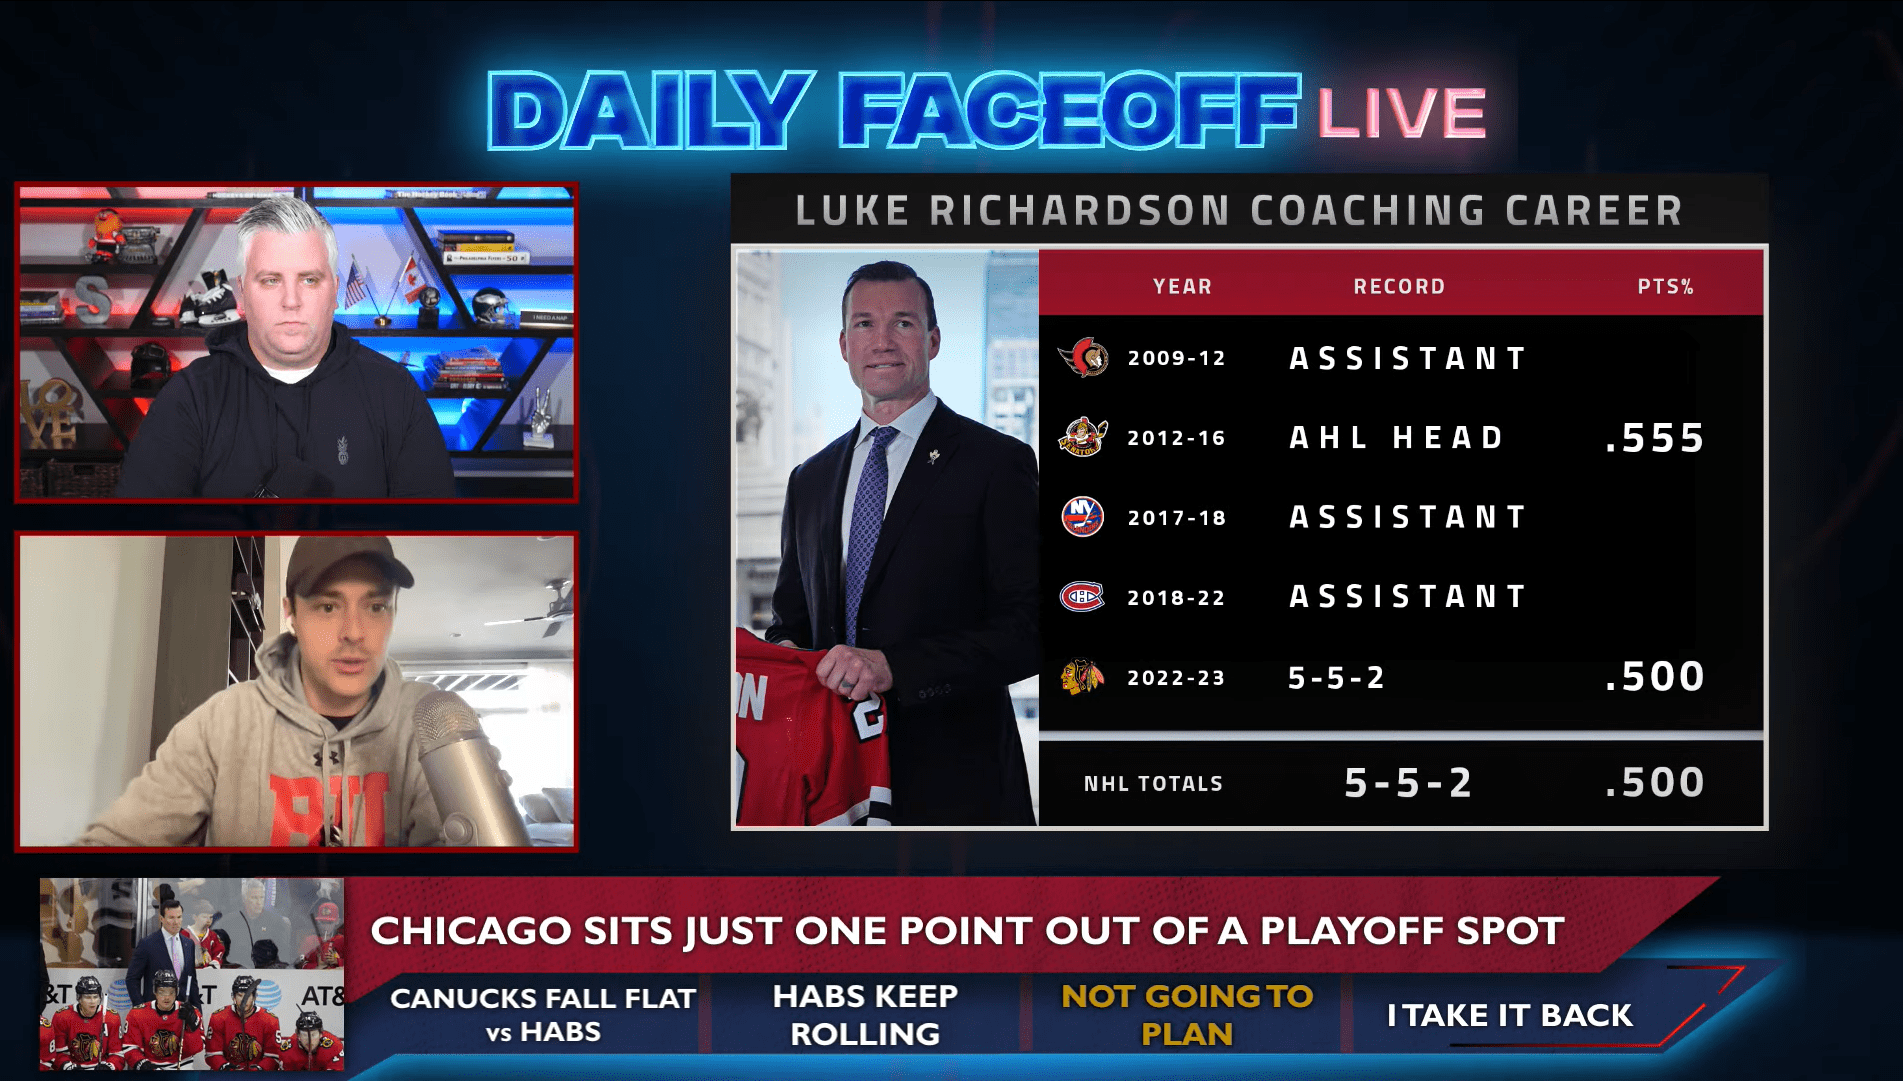 Daily Faceoff Live: Luke Richardson’s structure a big reason for Chicago’s early success